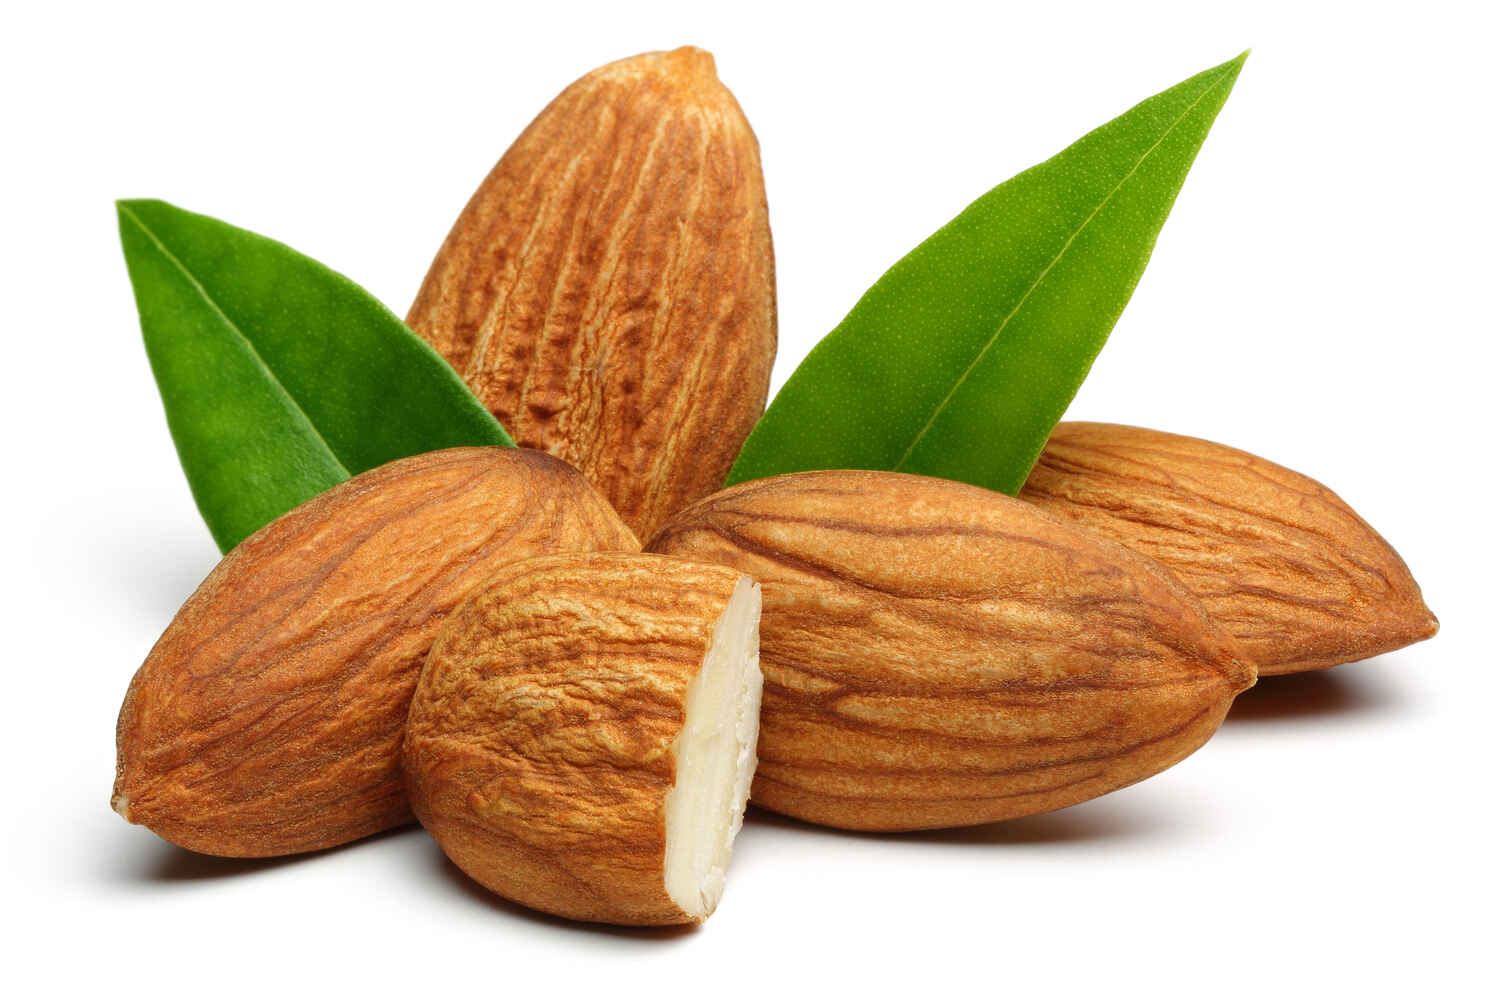 Almonds are a choking hazard for toddlers